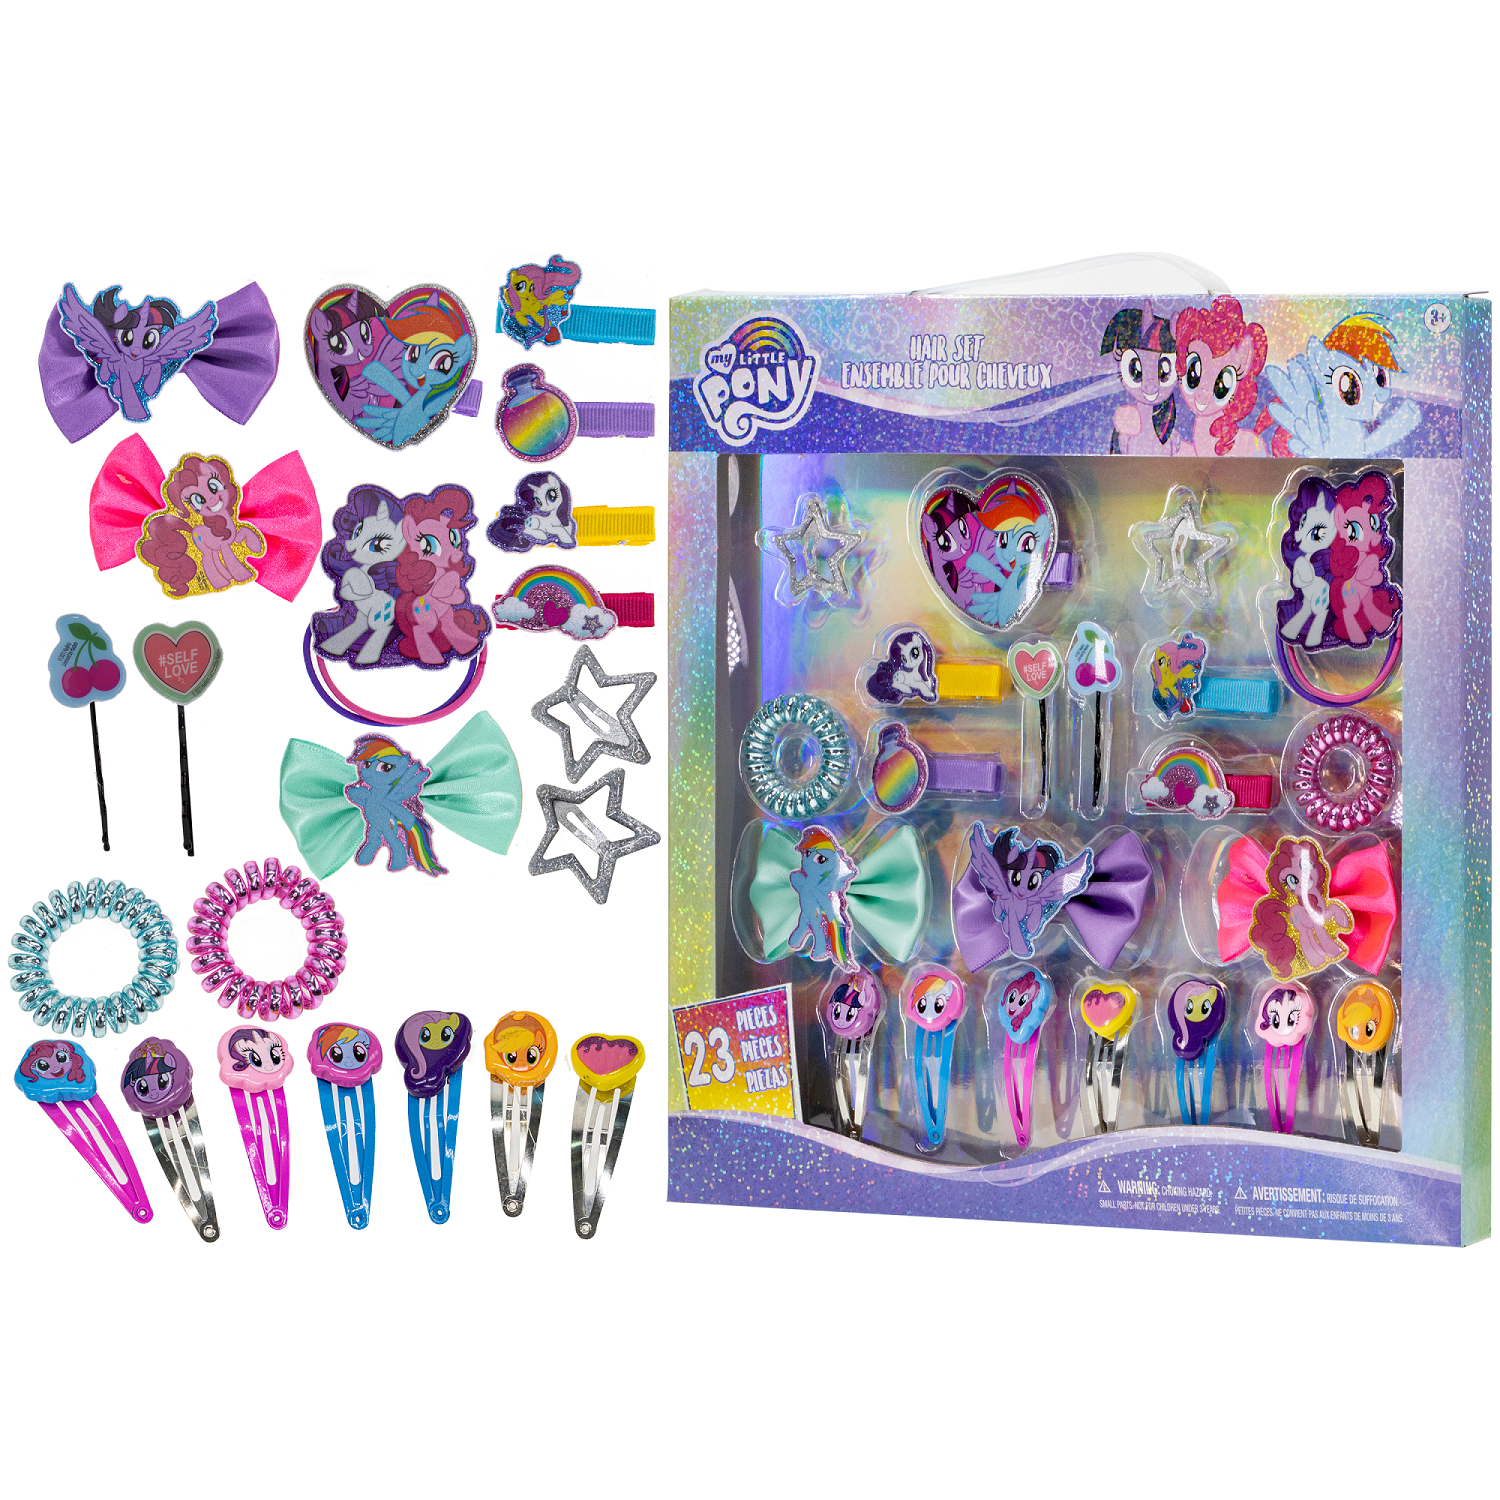 1-Count American Greetings My Little Pony Party Supplies Deluxe Headband 